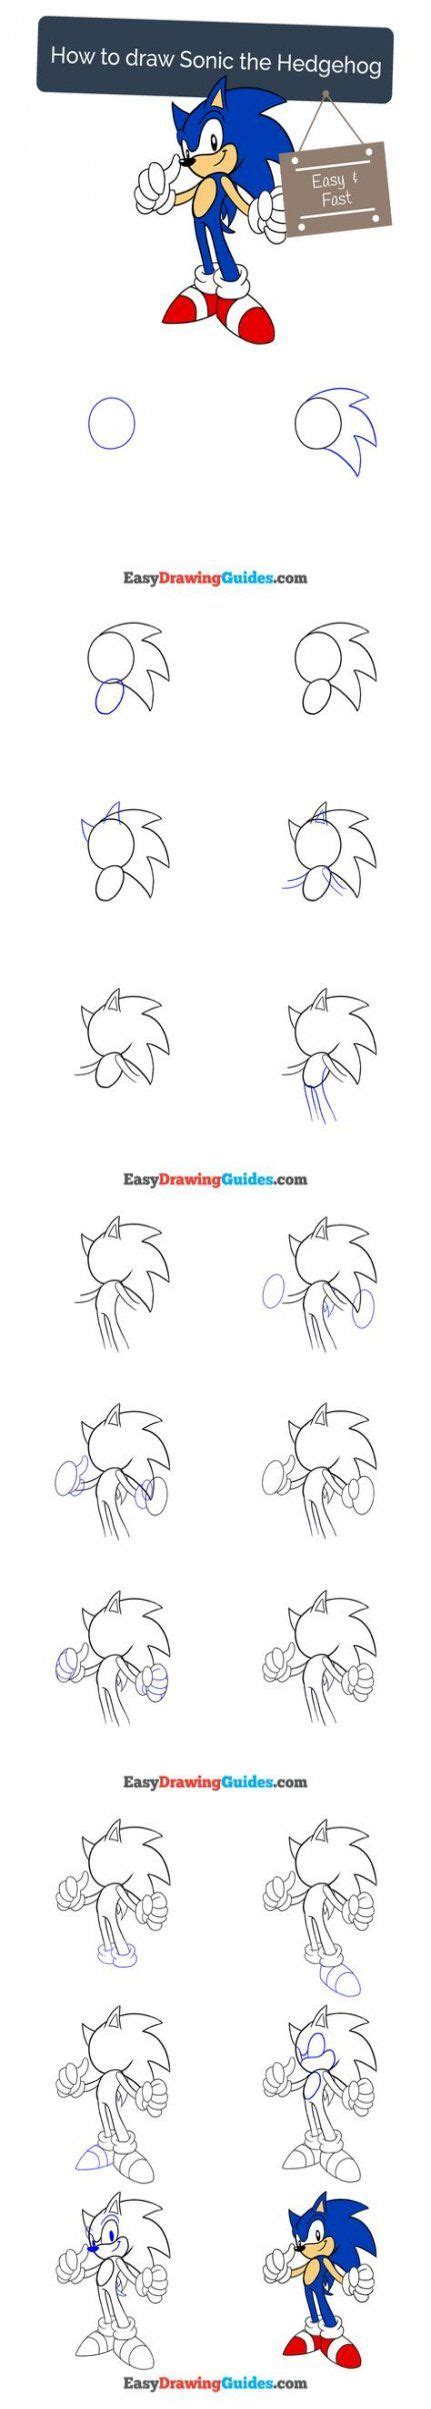 Drawing Girl And Boy Easy 40 Ideas For 2019 How To Draw Sonic